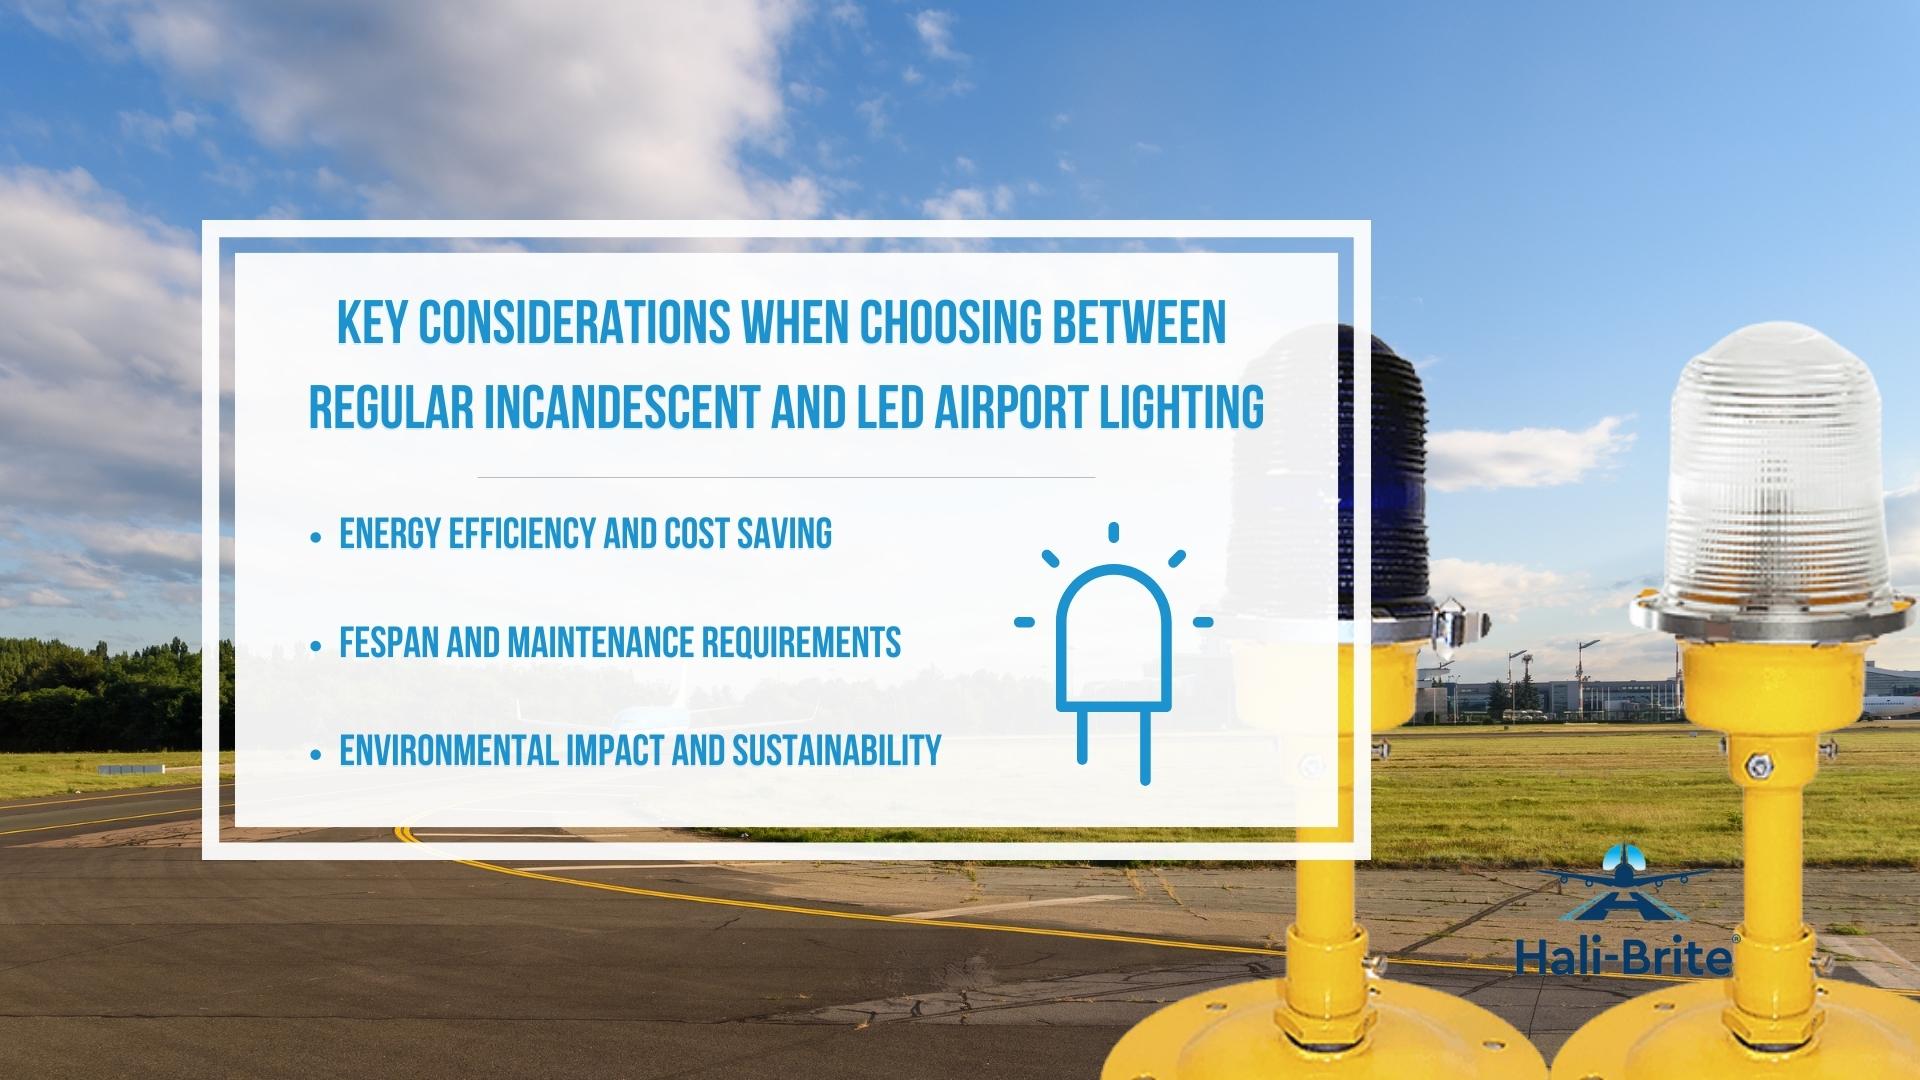 Infographic image of key considerations when choosing between regular incandescent and led airport lighting